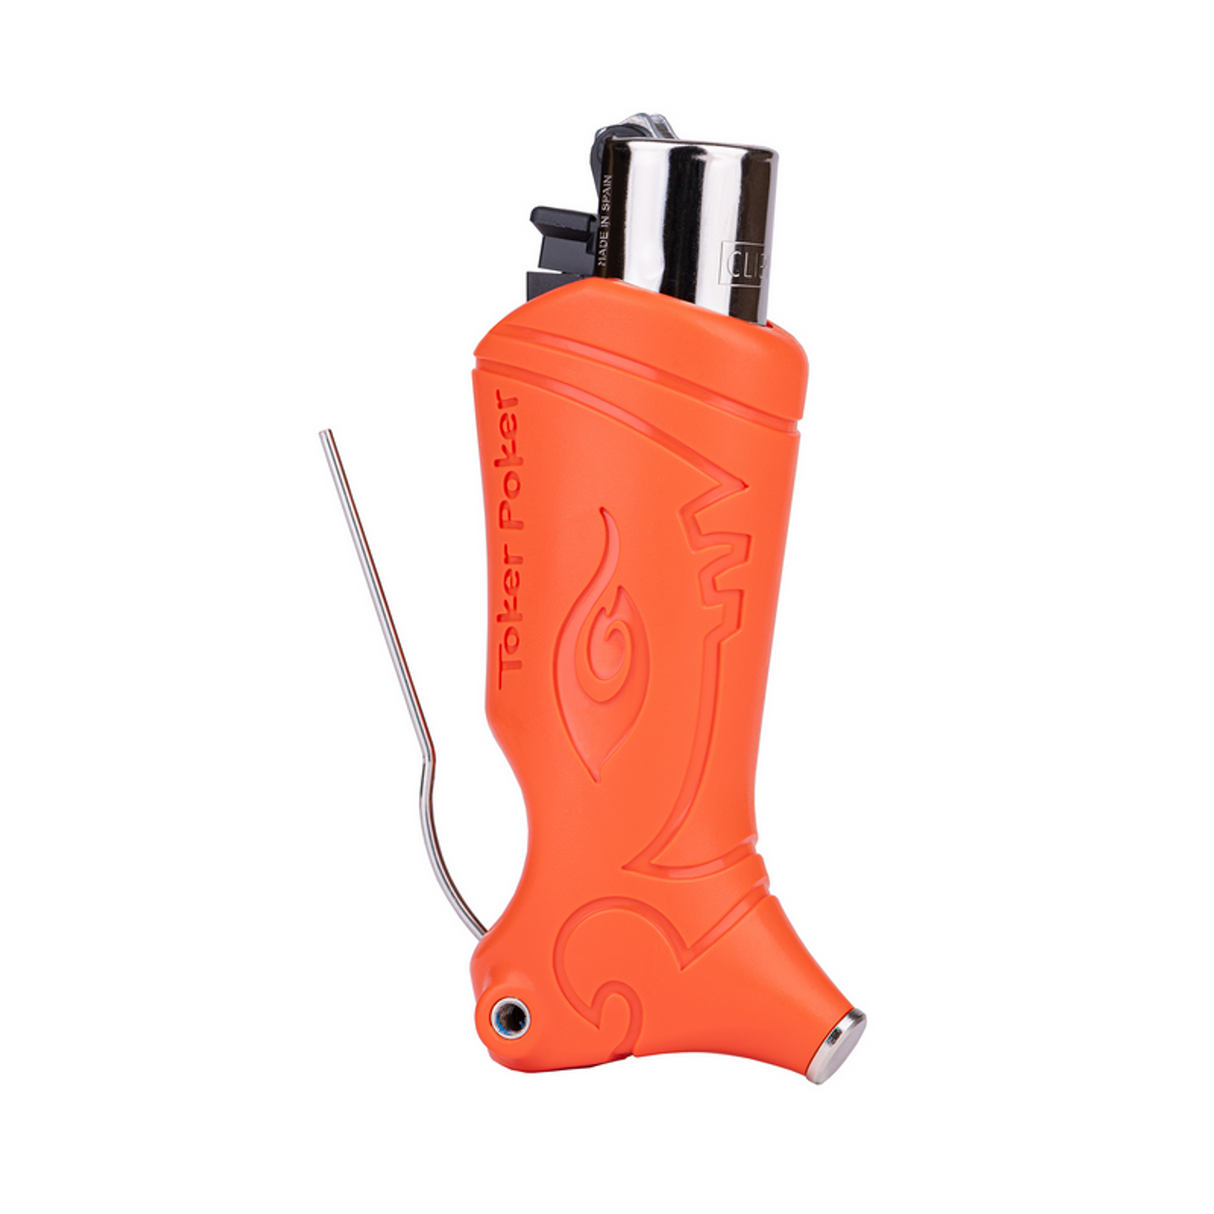 Toker Poker Clipper in Orange with Metal Poker and Tamper, Front View on White Background